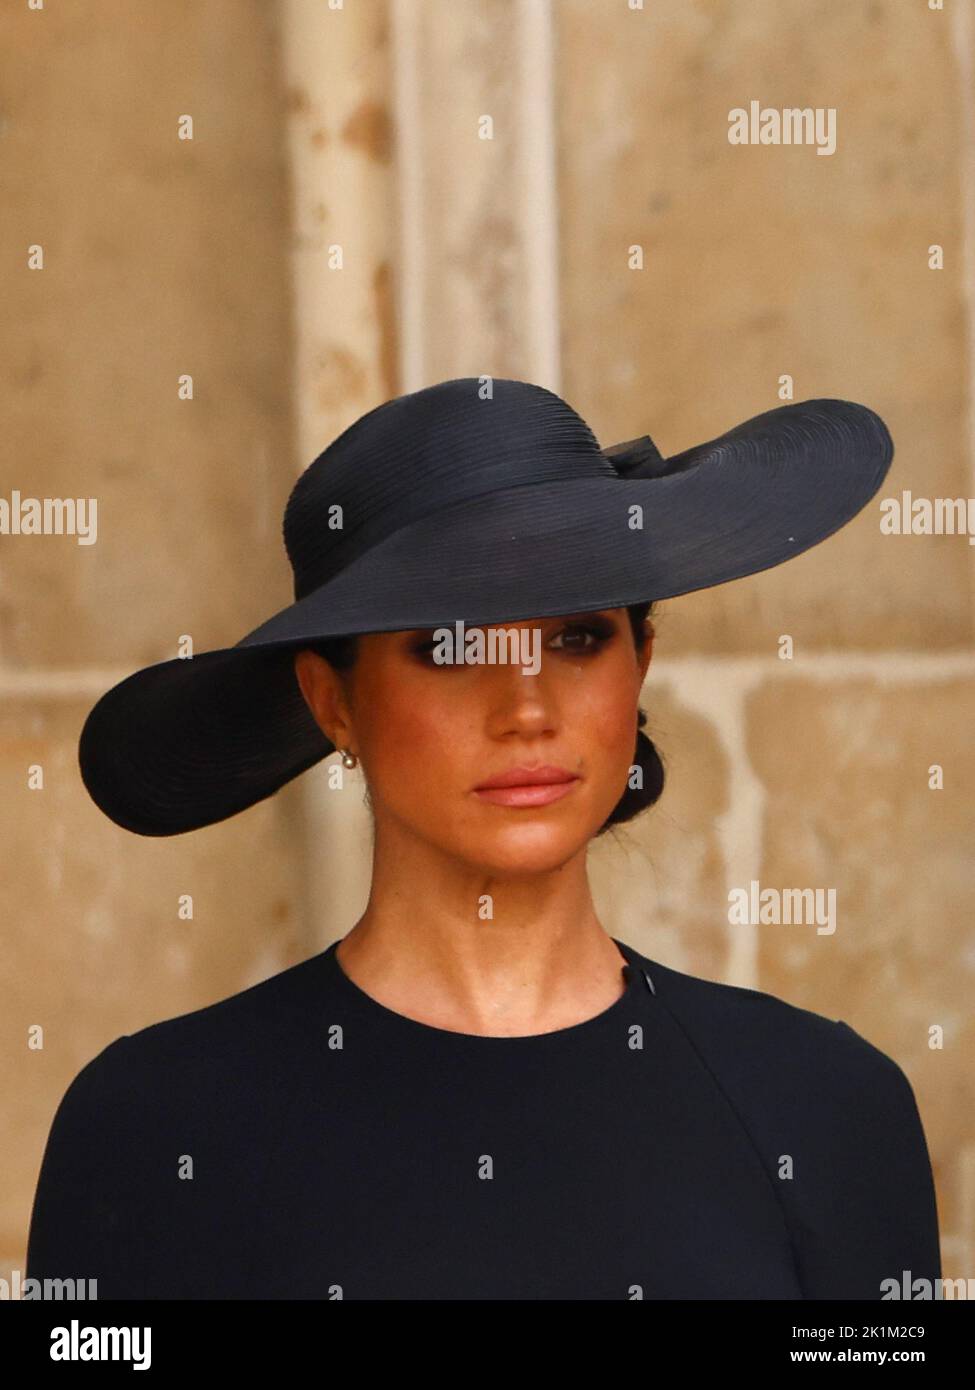 Britain's Meghan, Duchess of Sussex gets emotional as she attends the state funeral and burial of Britain's Queen Elizabeth at Westminster Abbey, in London, Britain, September 19, 2022.  REUTERS/Kai Pfaffenbach Stock Photo